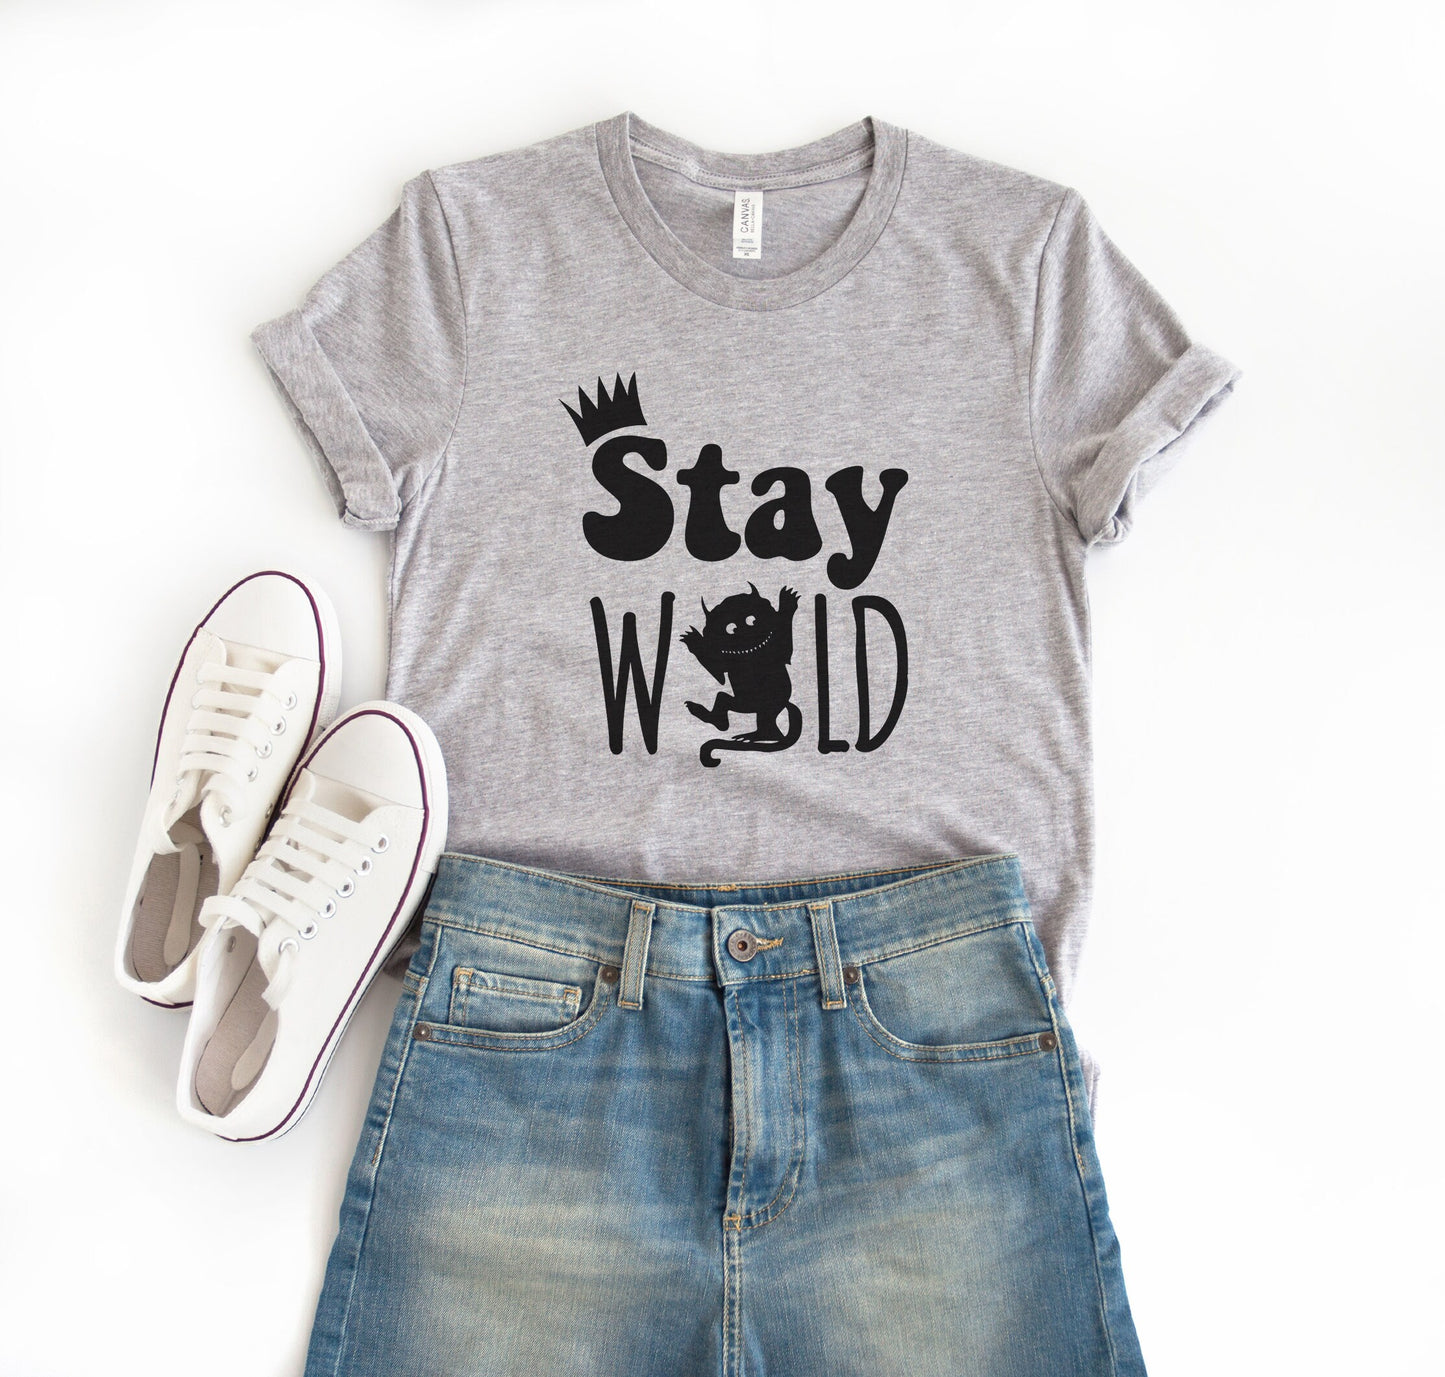 Stay Wild Children's Book Nostalgia Things from the 80's Unisex Soft Tee T-shirt for Women or Men